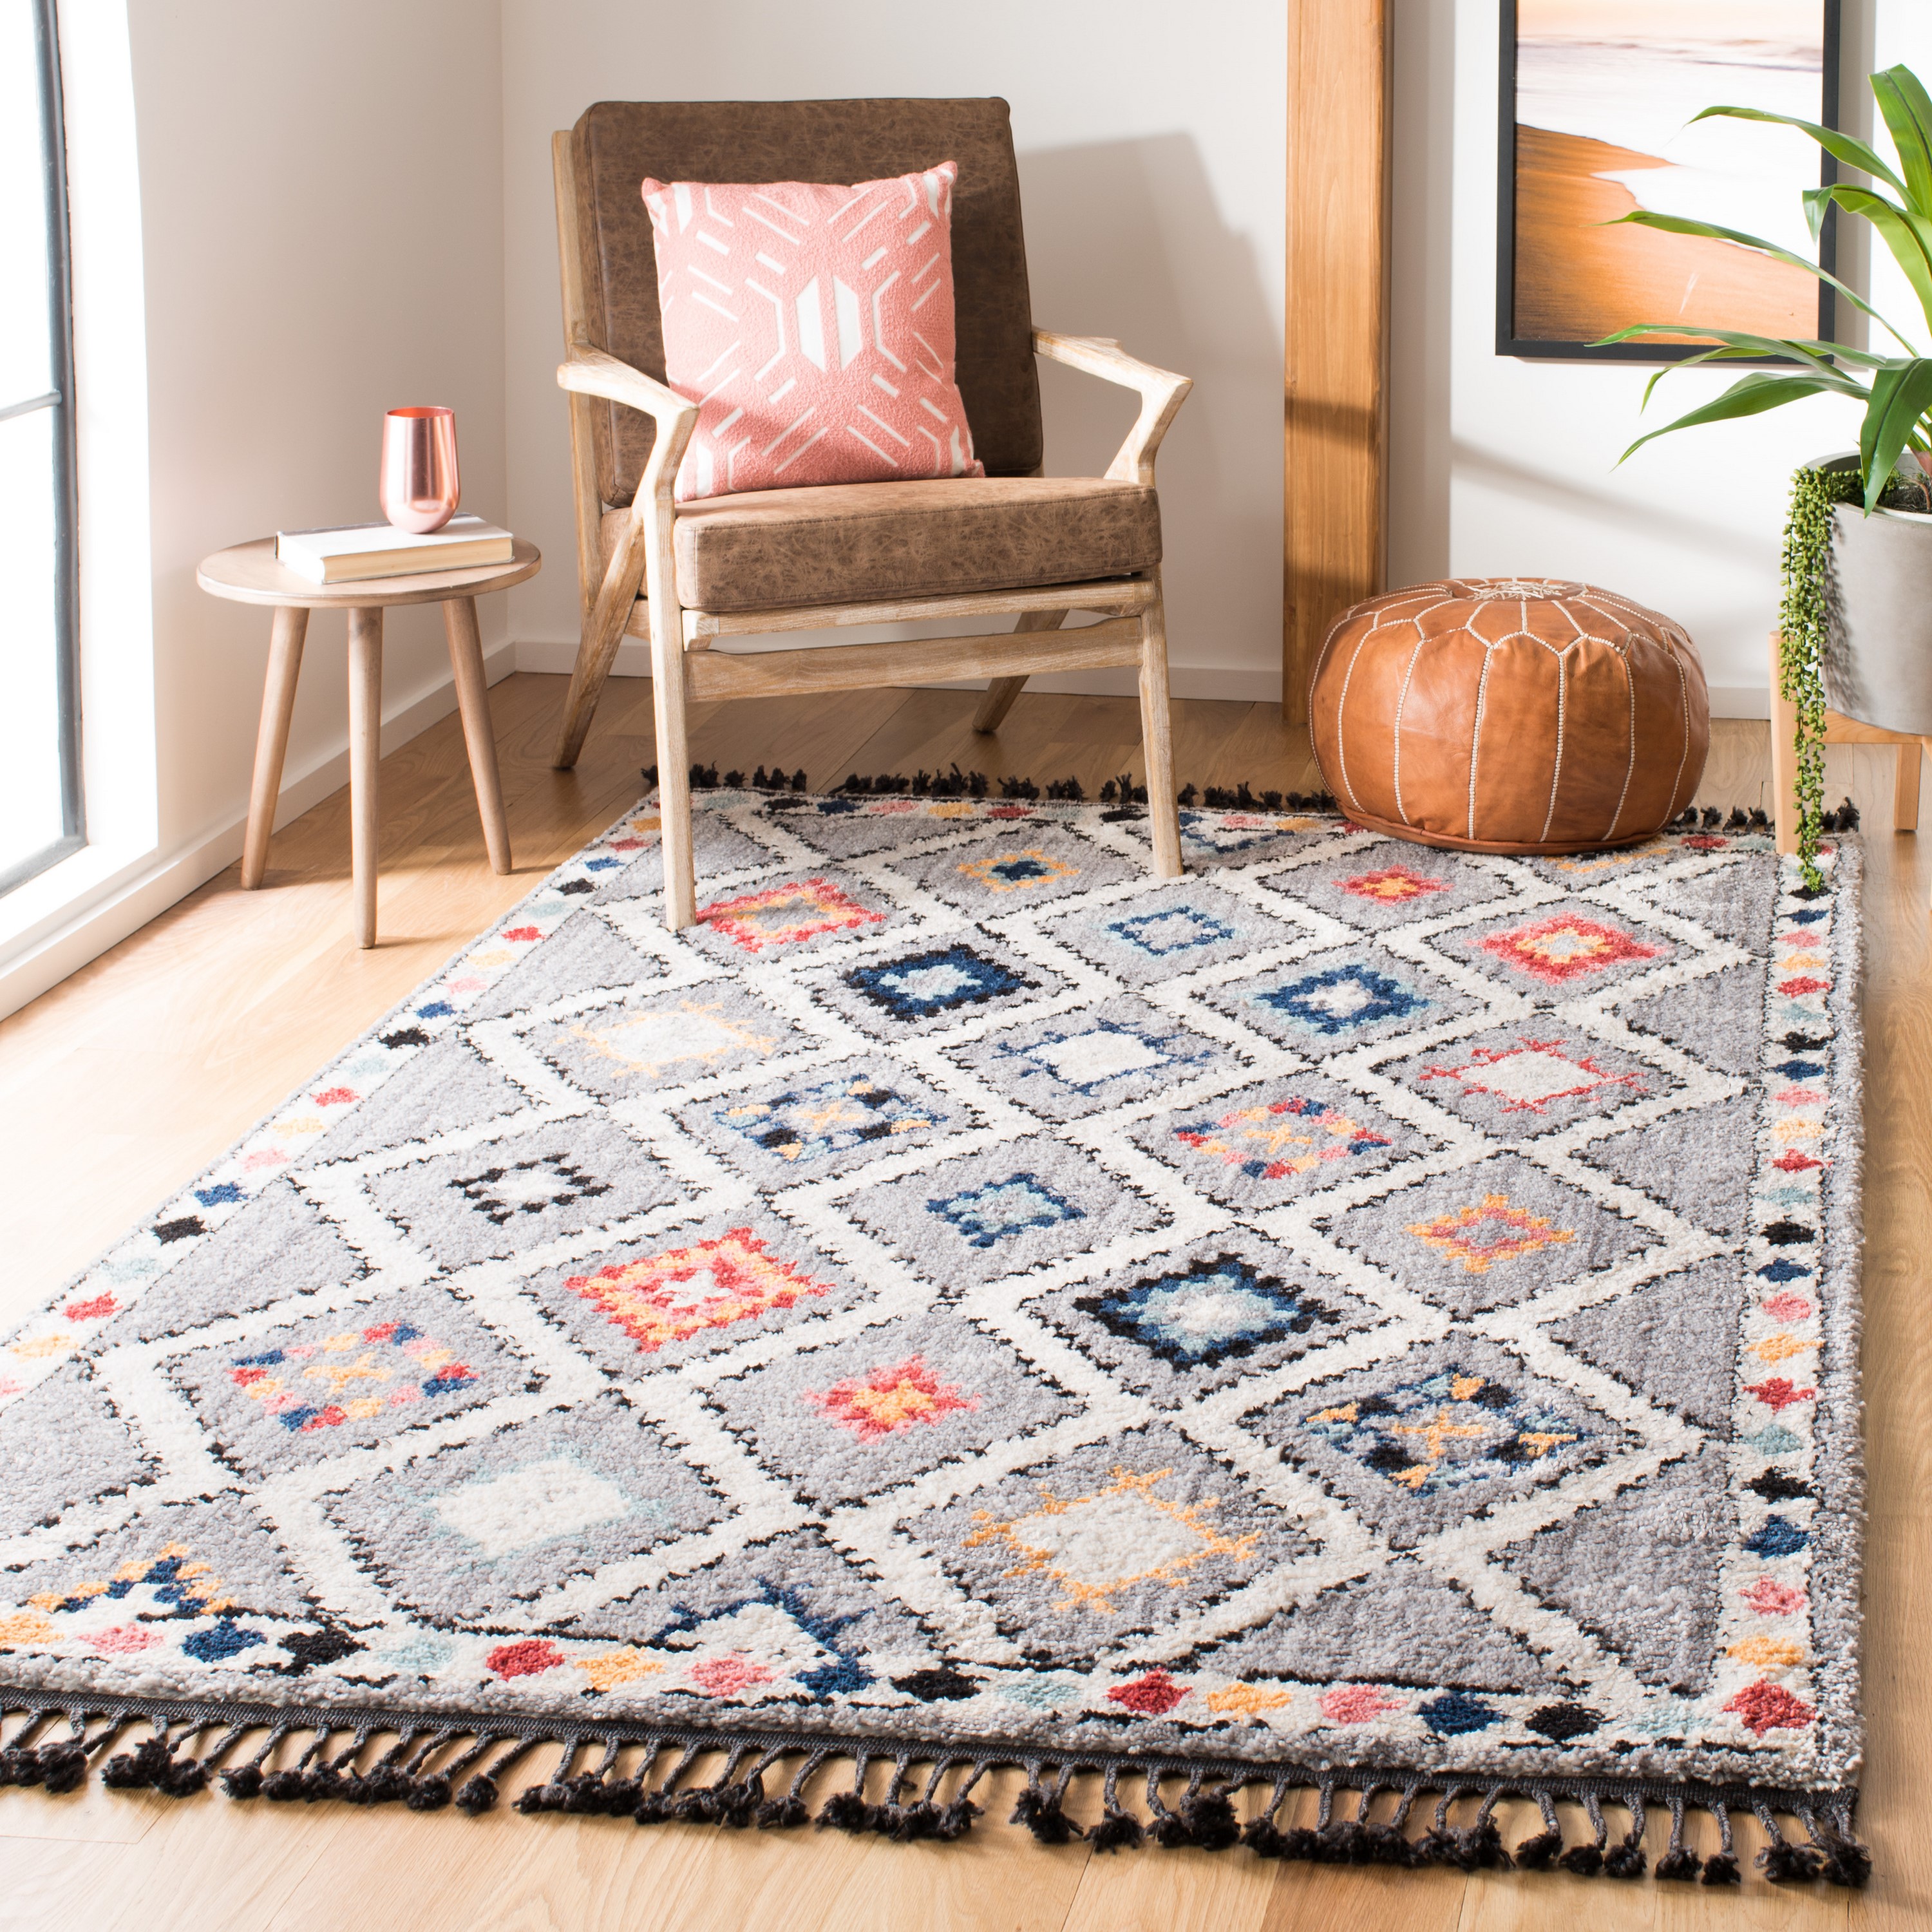 Safavieh Morocco Nedil 4 x 6 Gray Indoor Abstract Area Rug at Lowes.com